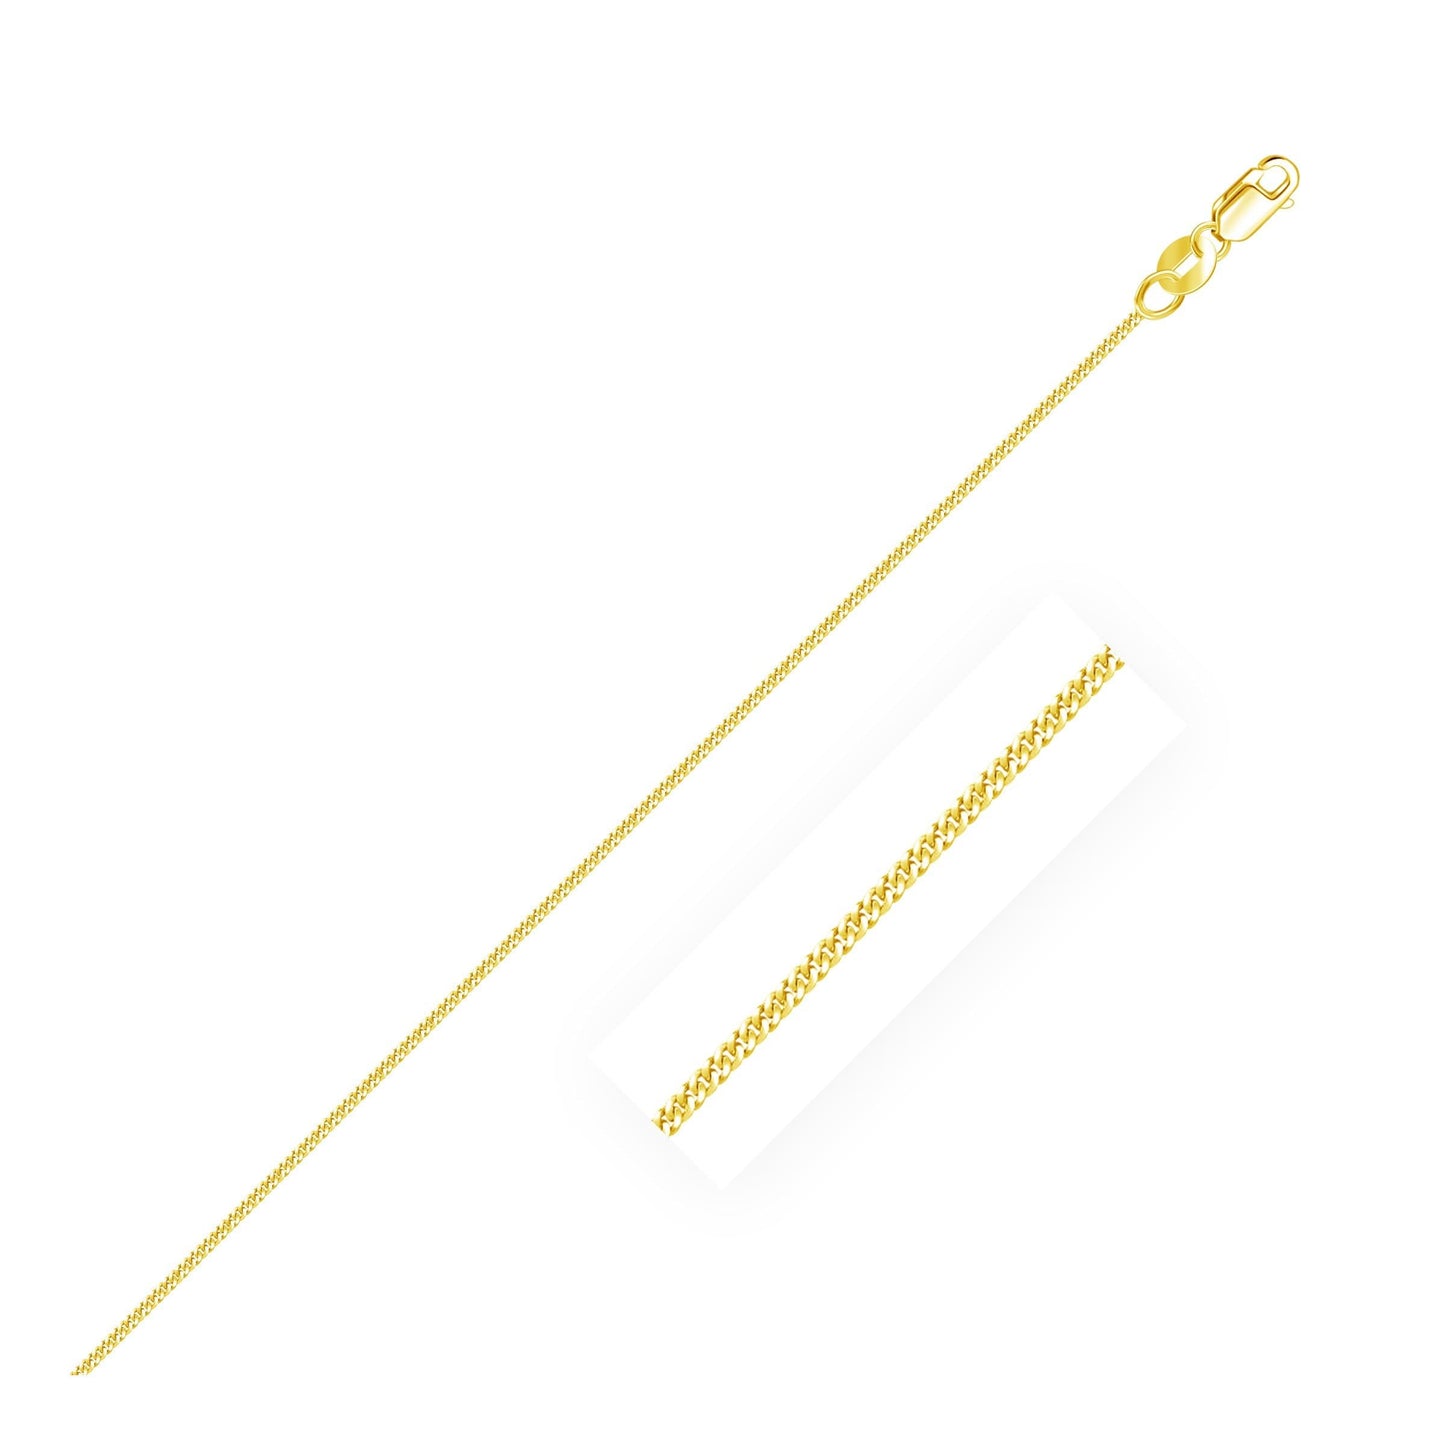 14k Yellow Gold Gourmette Chain in 1.0 mm